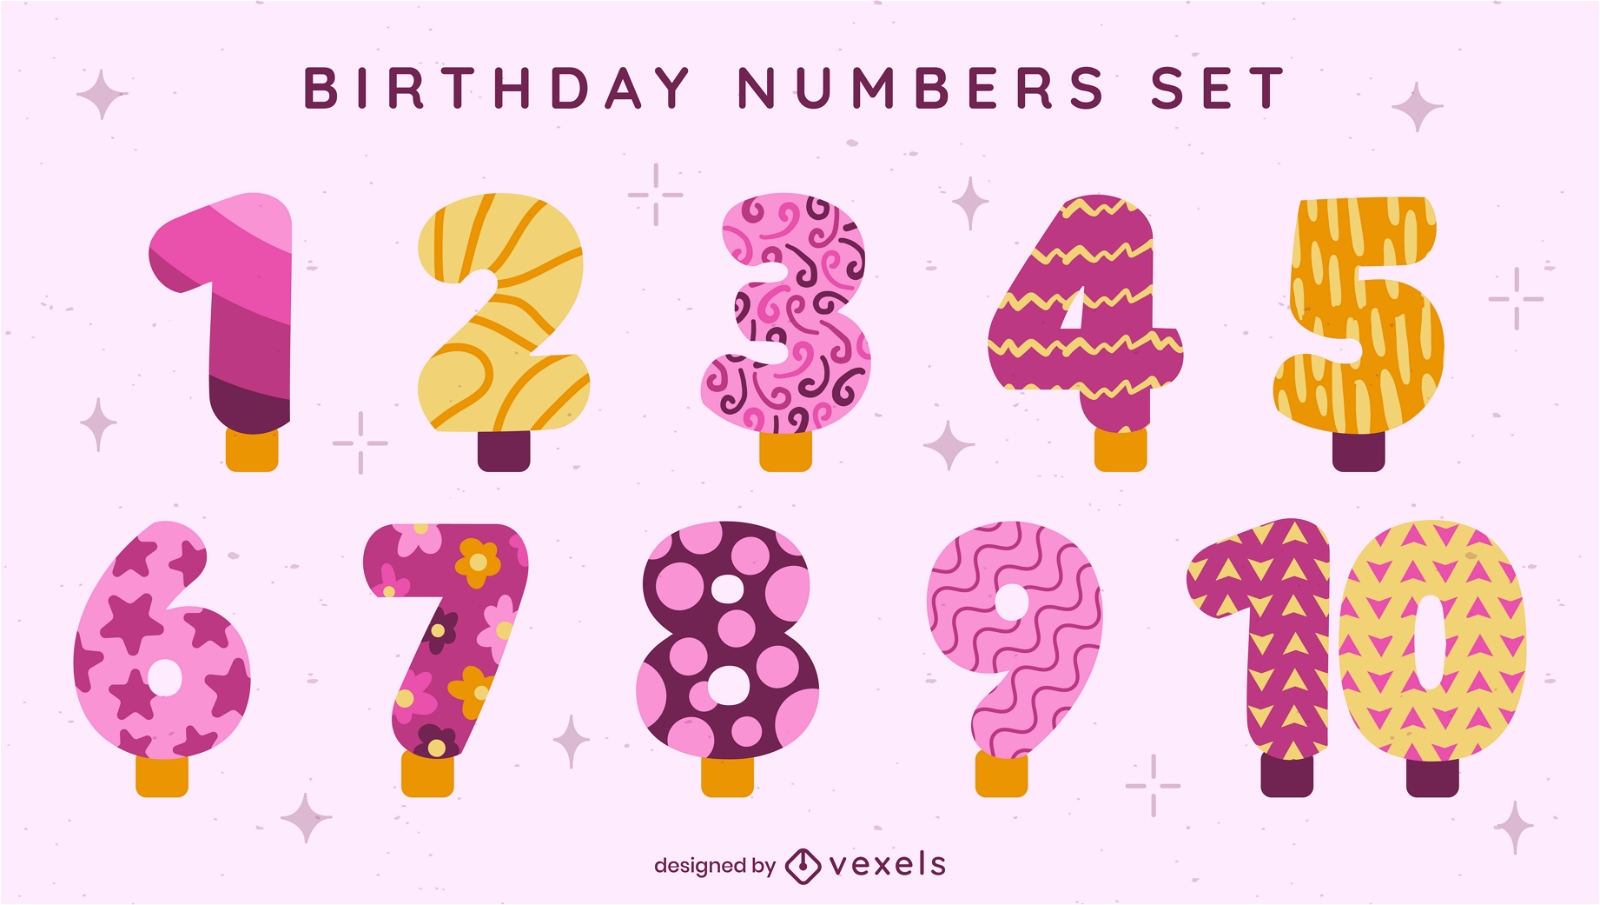 Birthday numbers colorful set